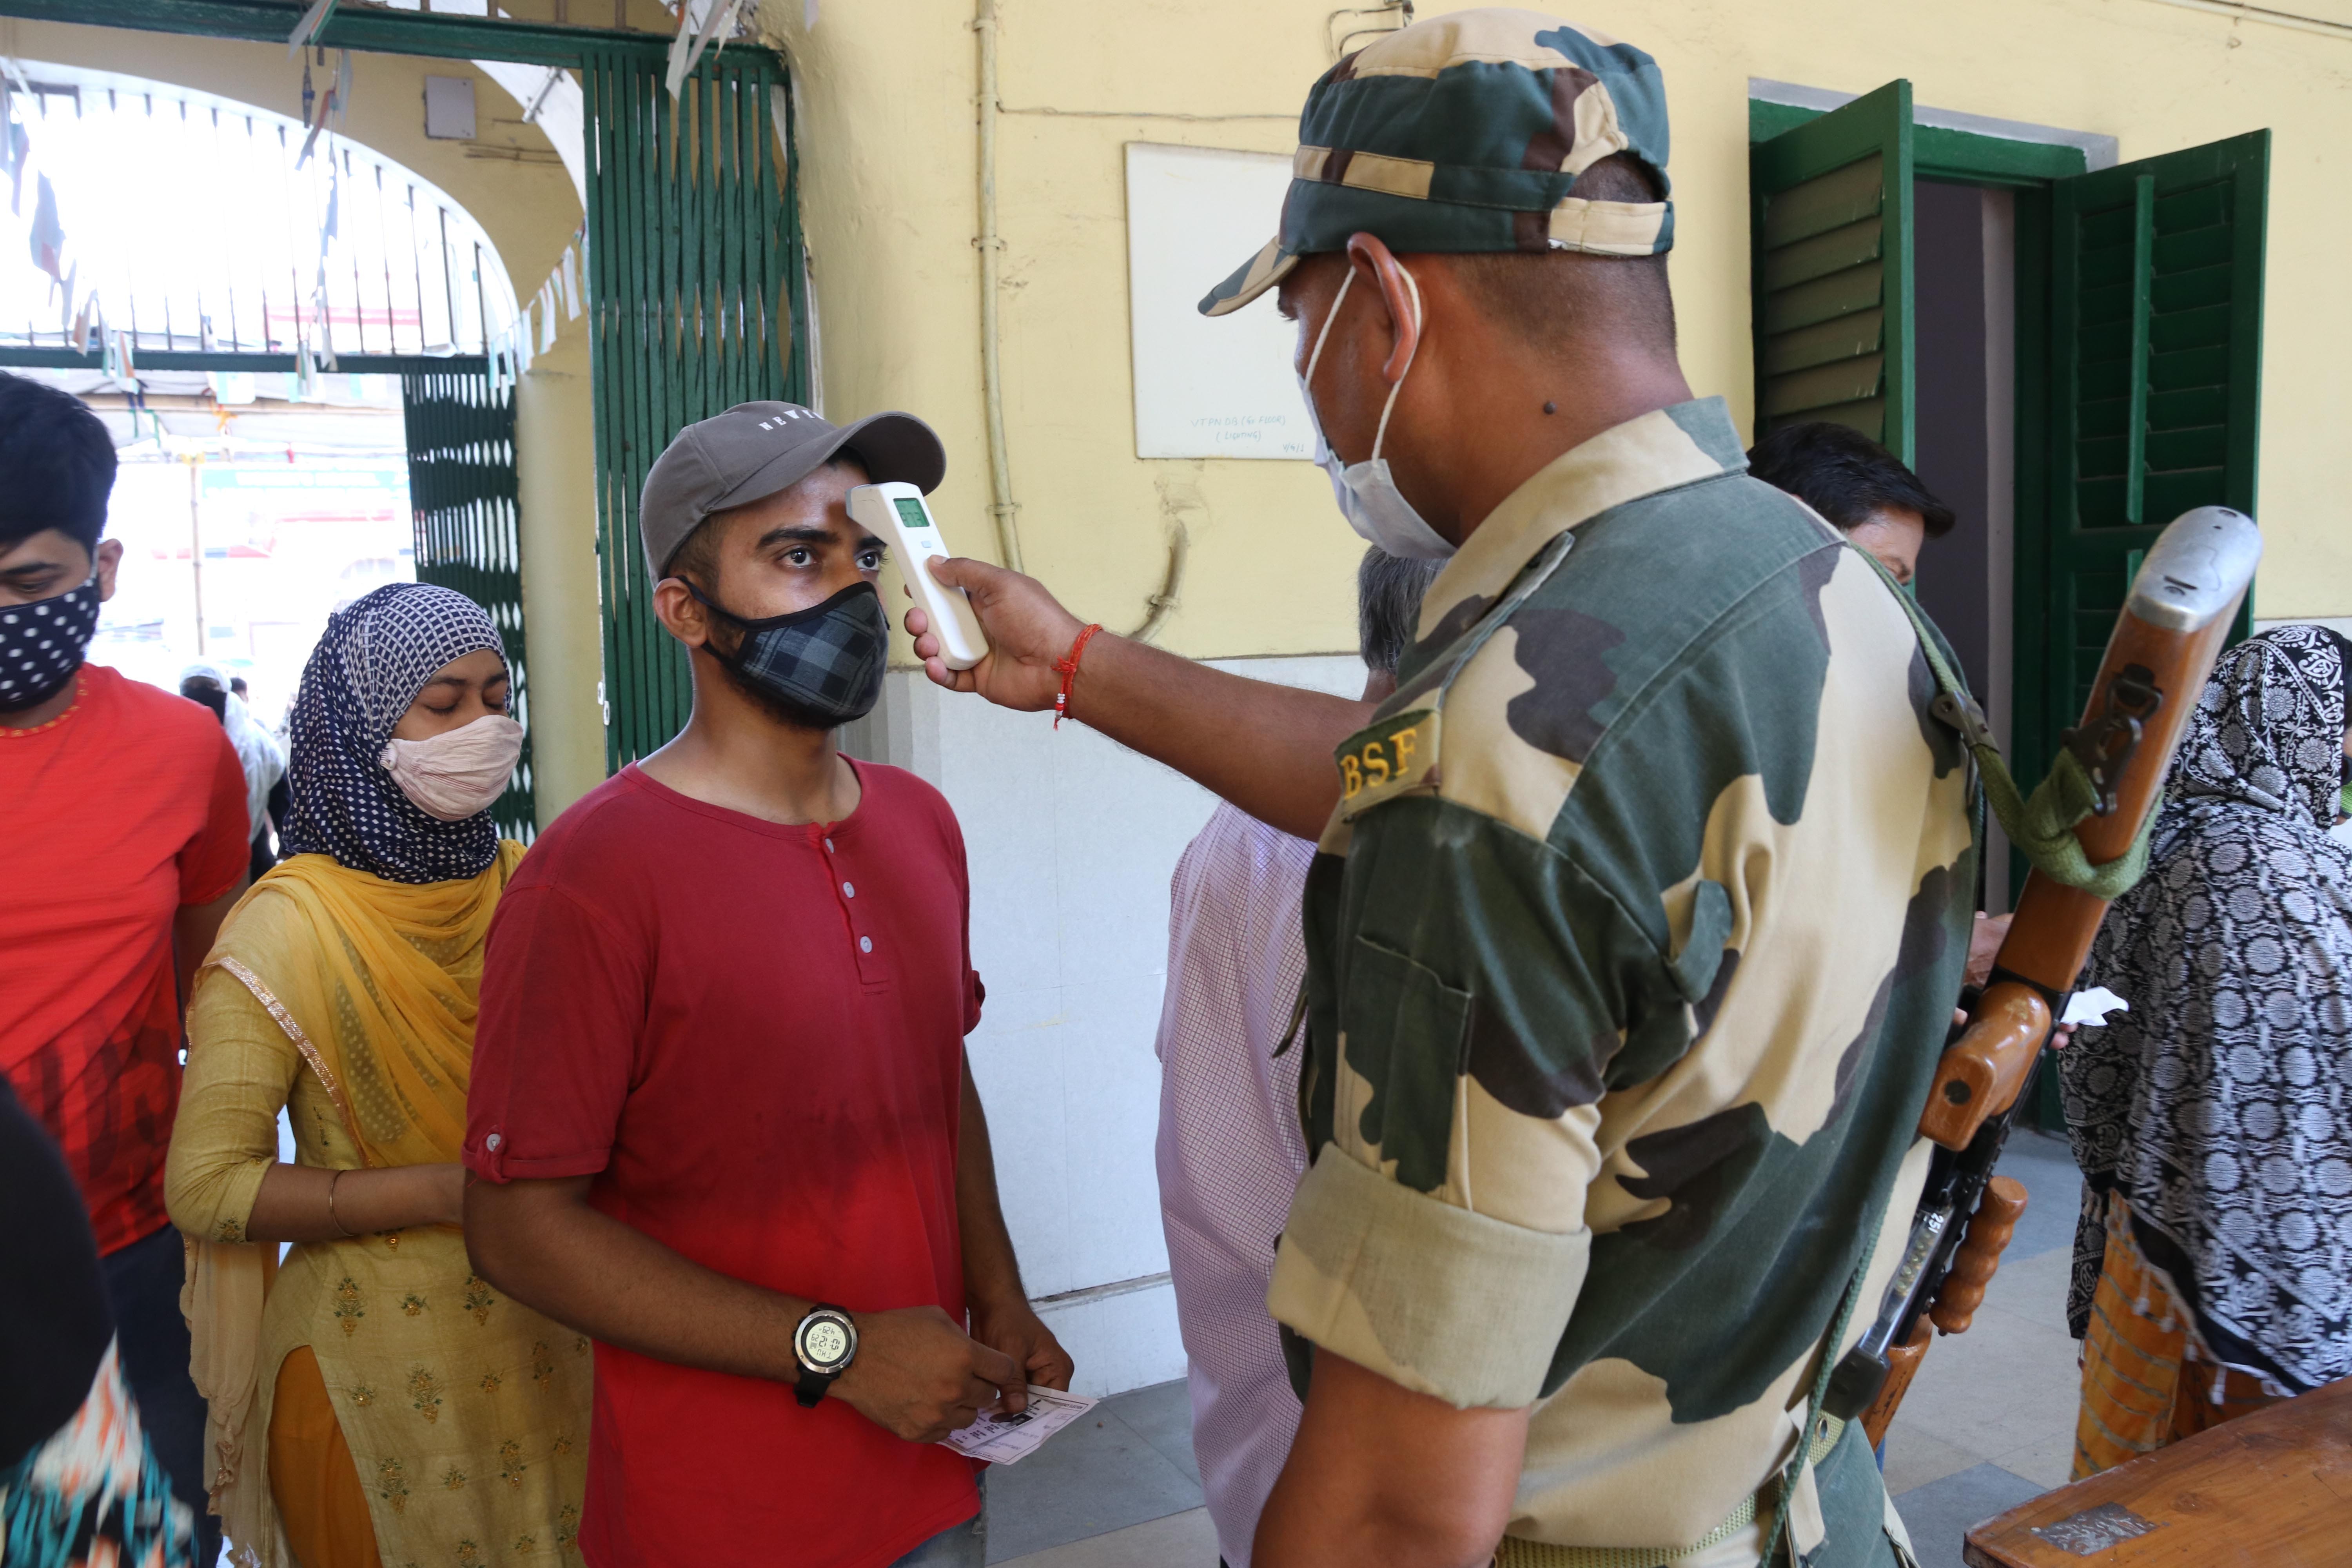 A paramilitary personnel  checks the body temperature of a woman wearing mask shows before her vote at a polling station during  8th phase of West Bengal assembly elections in Kolkata, India on 29 th April, 2021. The 8th phase of West Bengal Assembly Elec (Foto: NurPhoto via Getty Images)